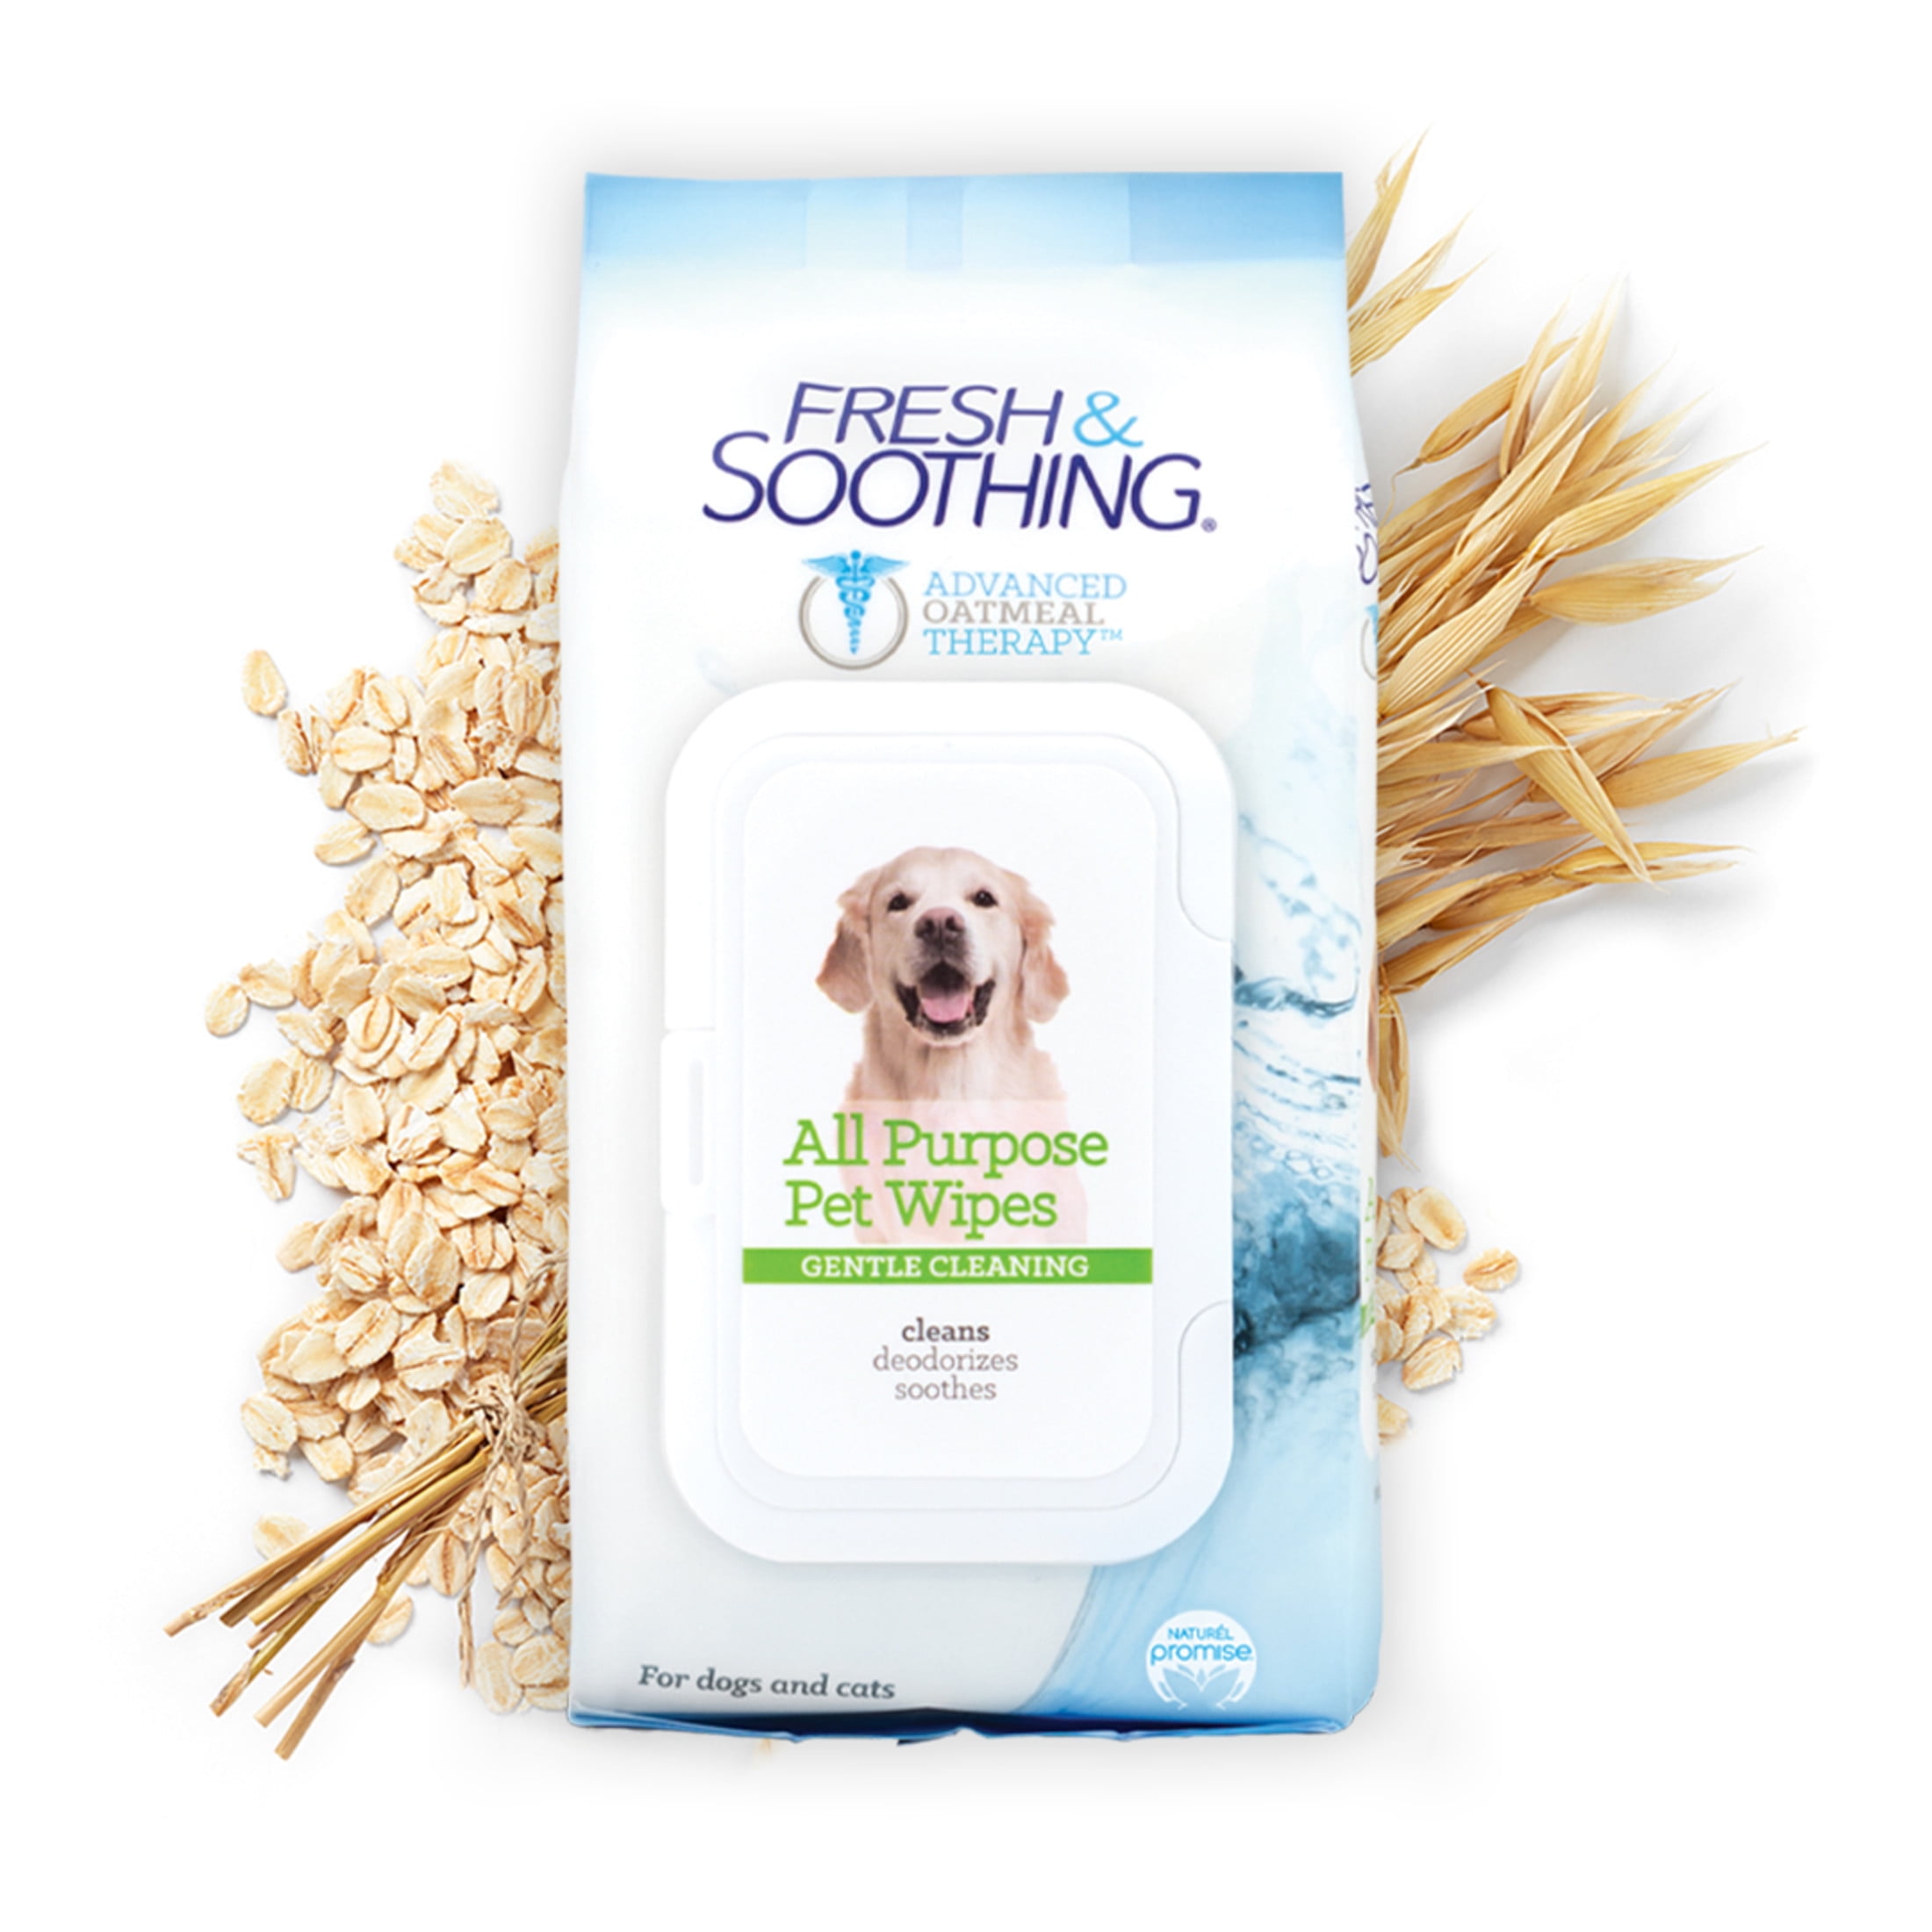  Earth Rated Plant Based Dog Wipes - Cleaning and  Odor-Controlling Grooming Wipes for Paws, Body, and Butt - Perfect for  Puppy and Adult Dogs - Lavender Scented - 100 Count